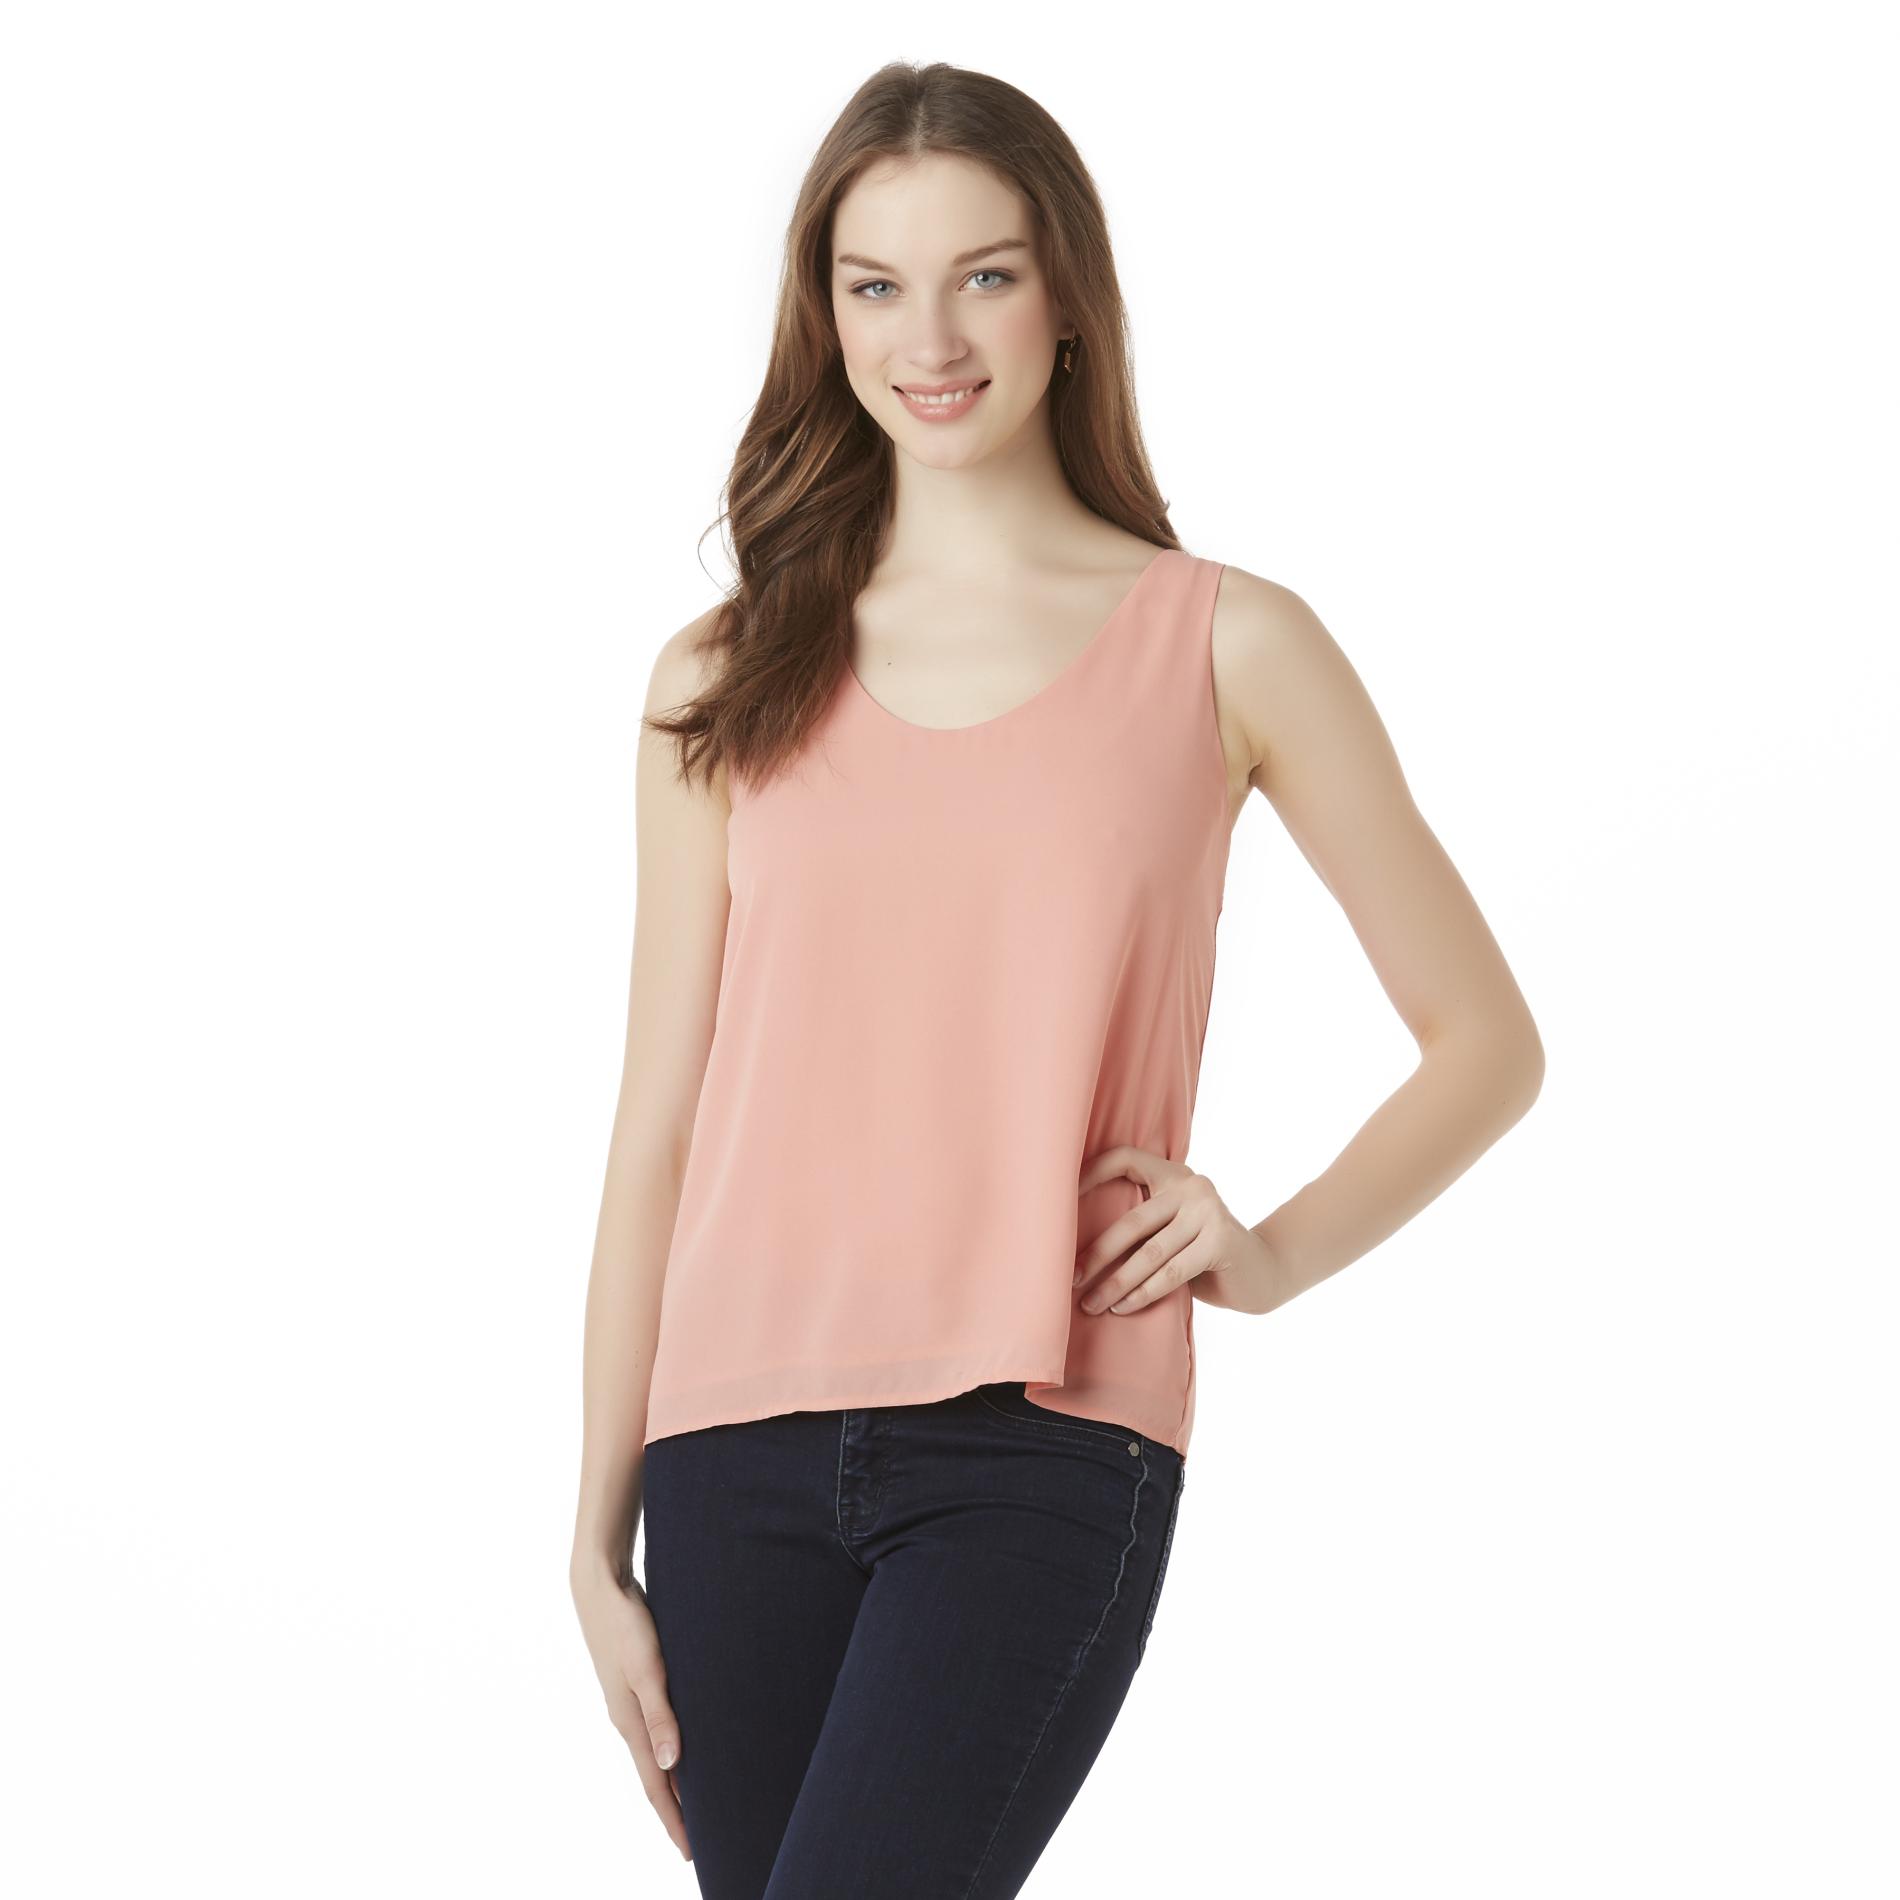 Simply Styled Women's Sleeveless Scoop Neck Top